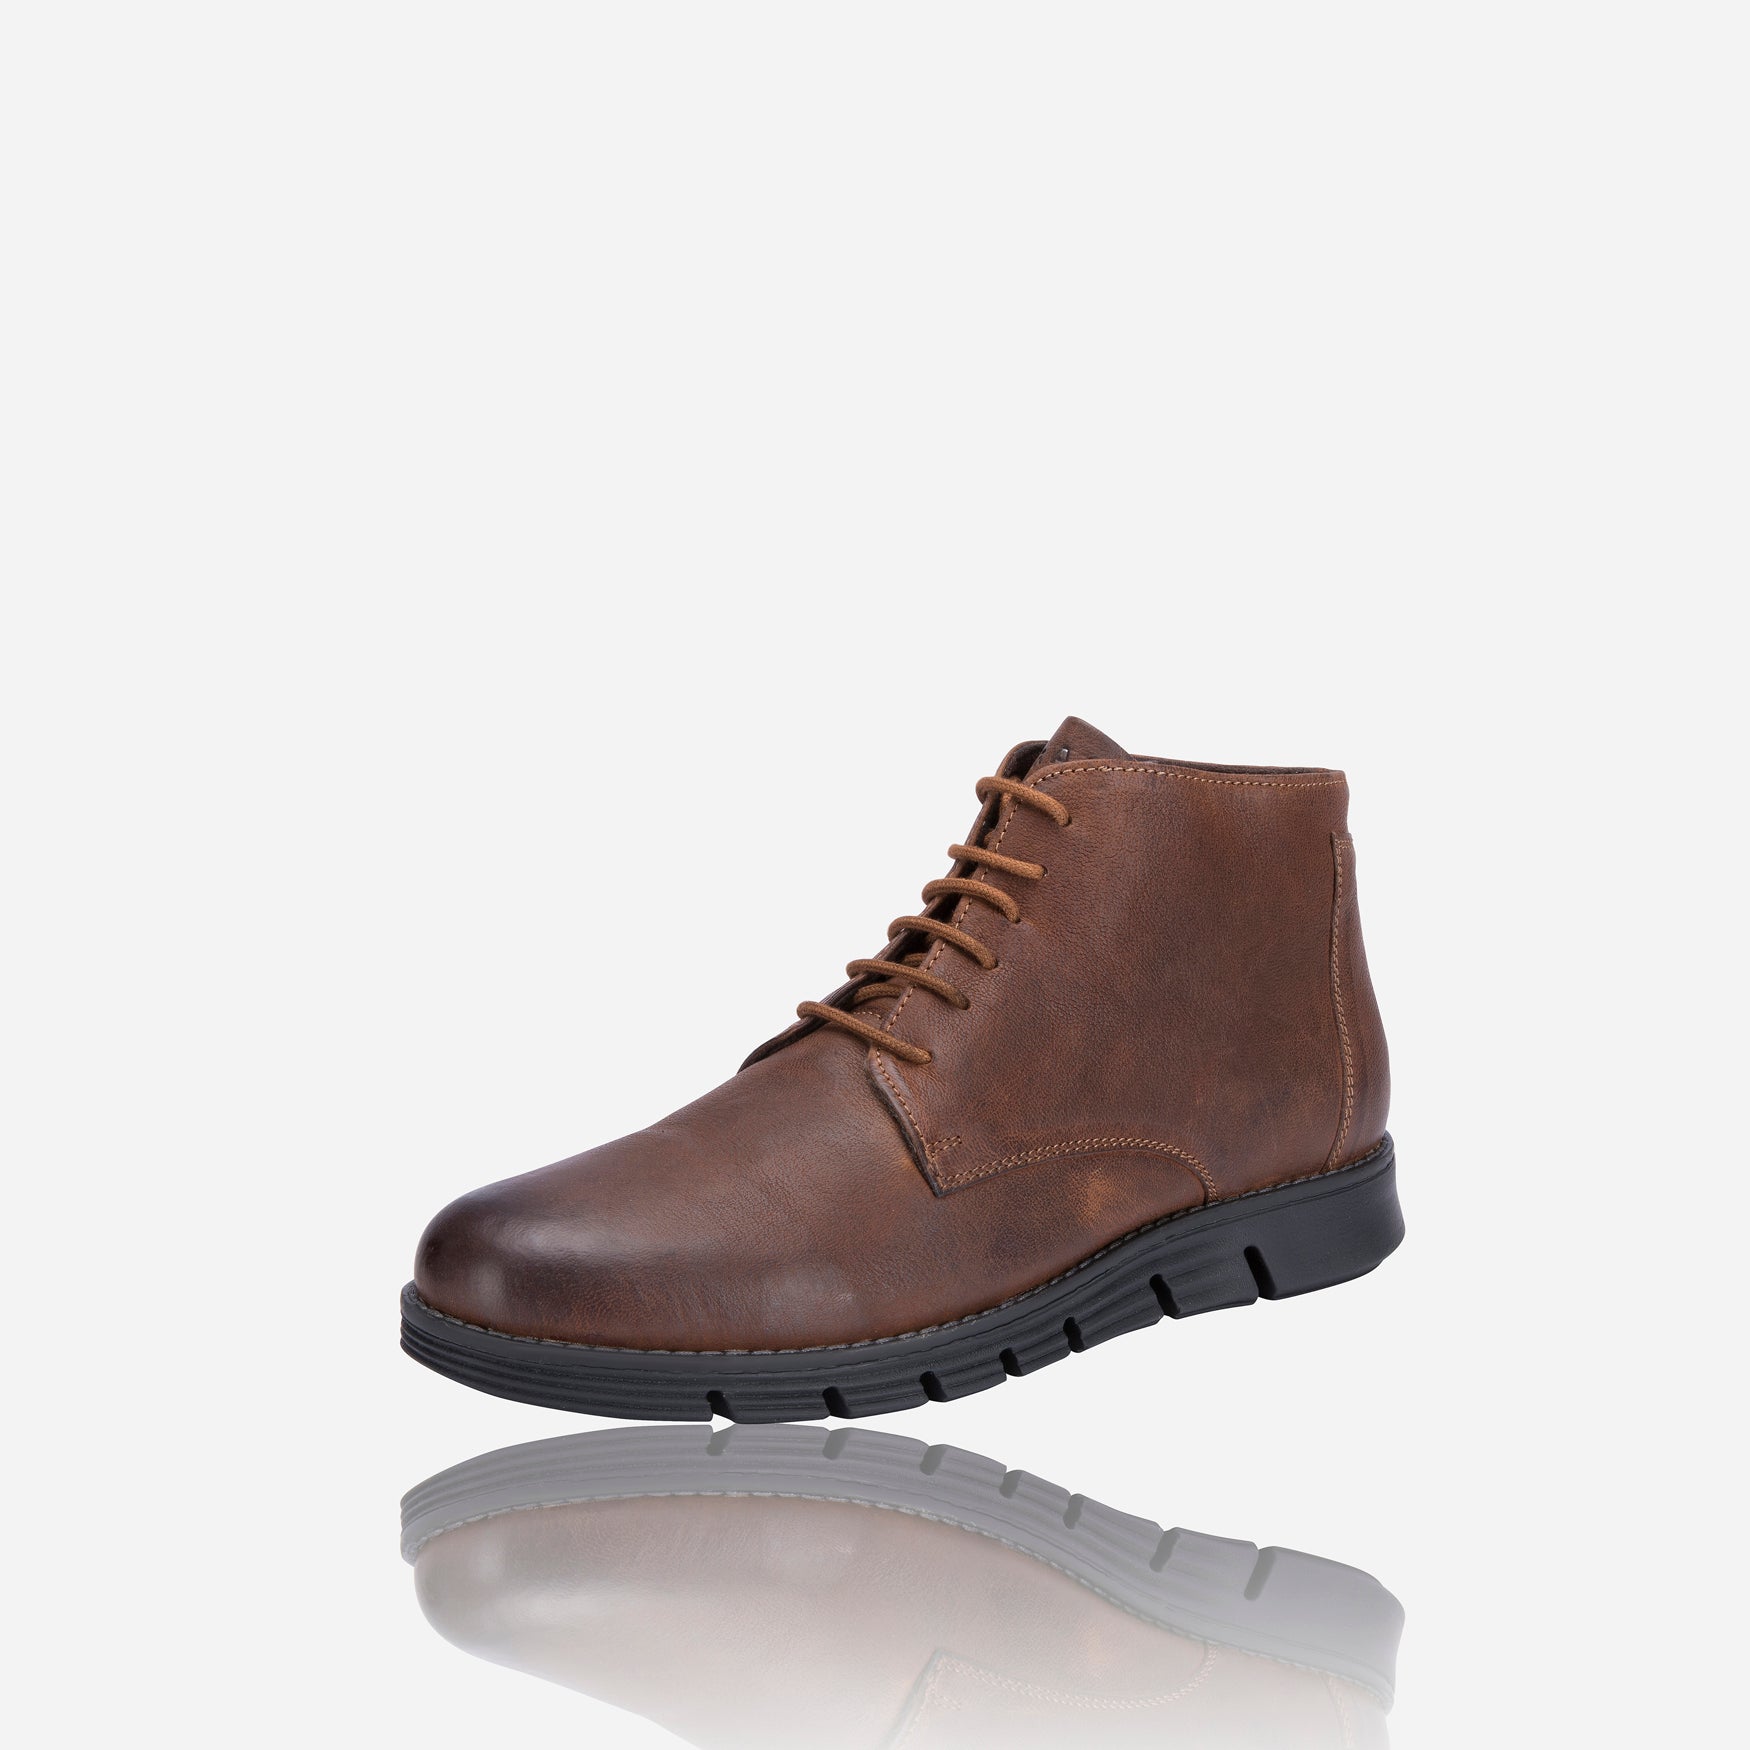 Tuskey Lace Boot - Tobacco - Leather Shoes | Brando Leather South Africa